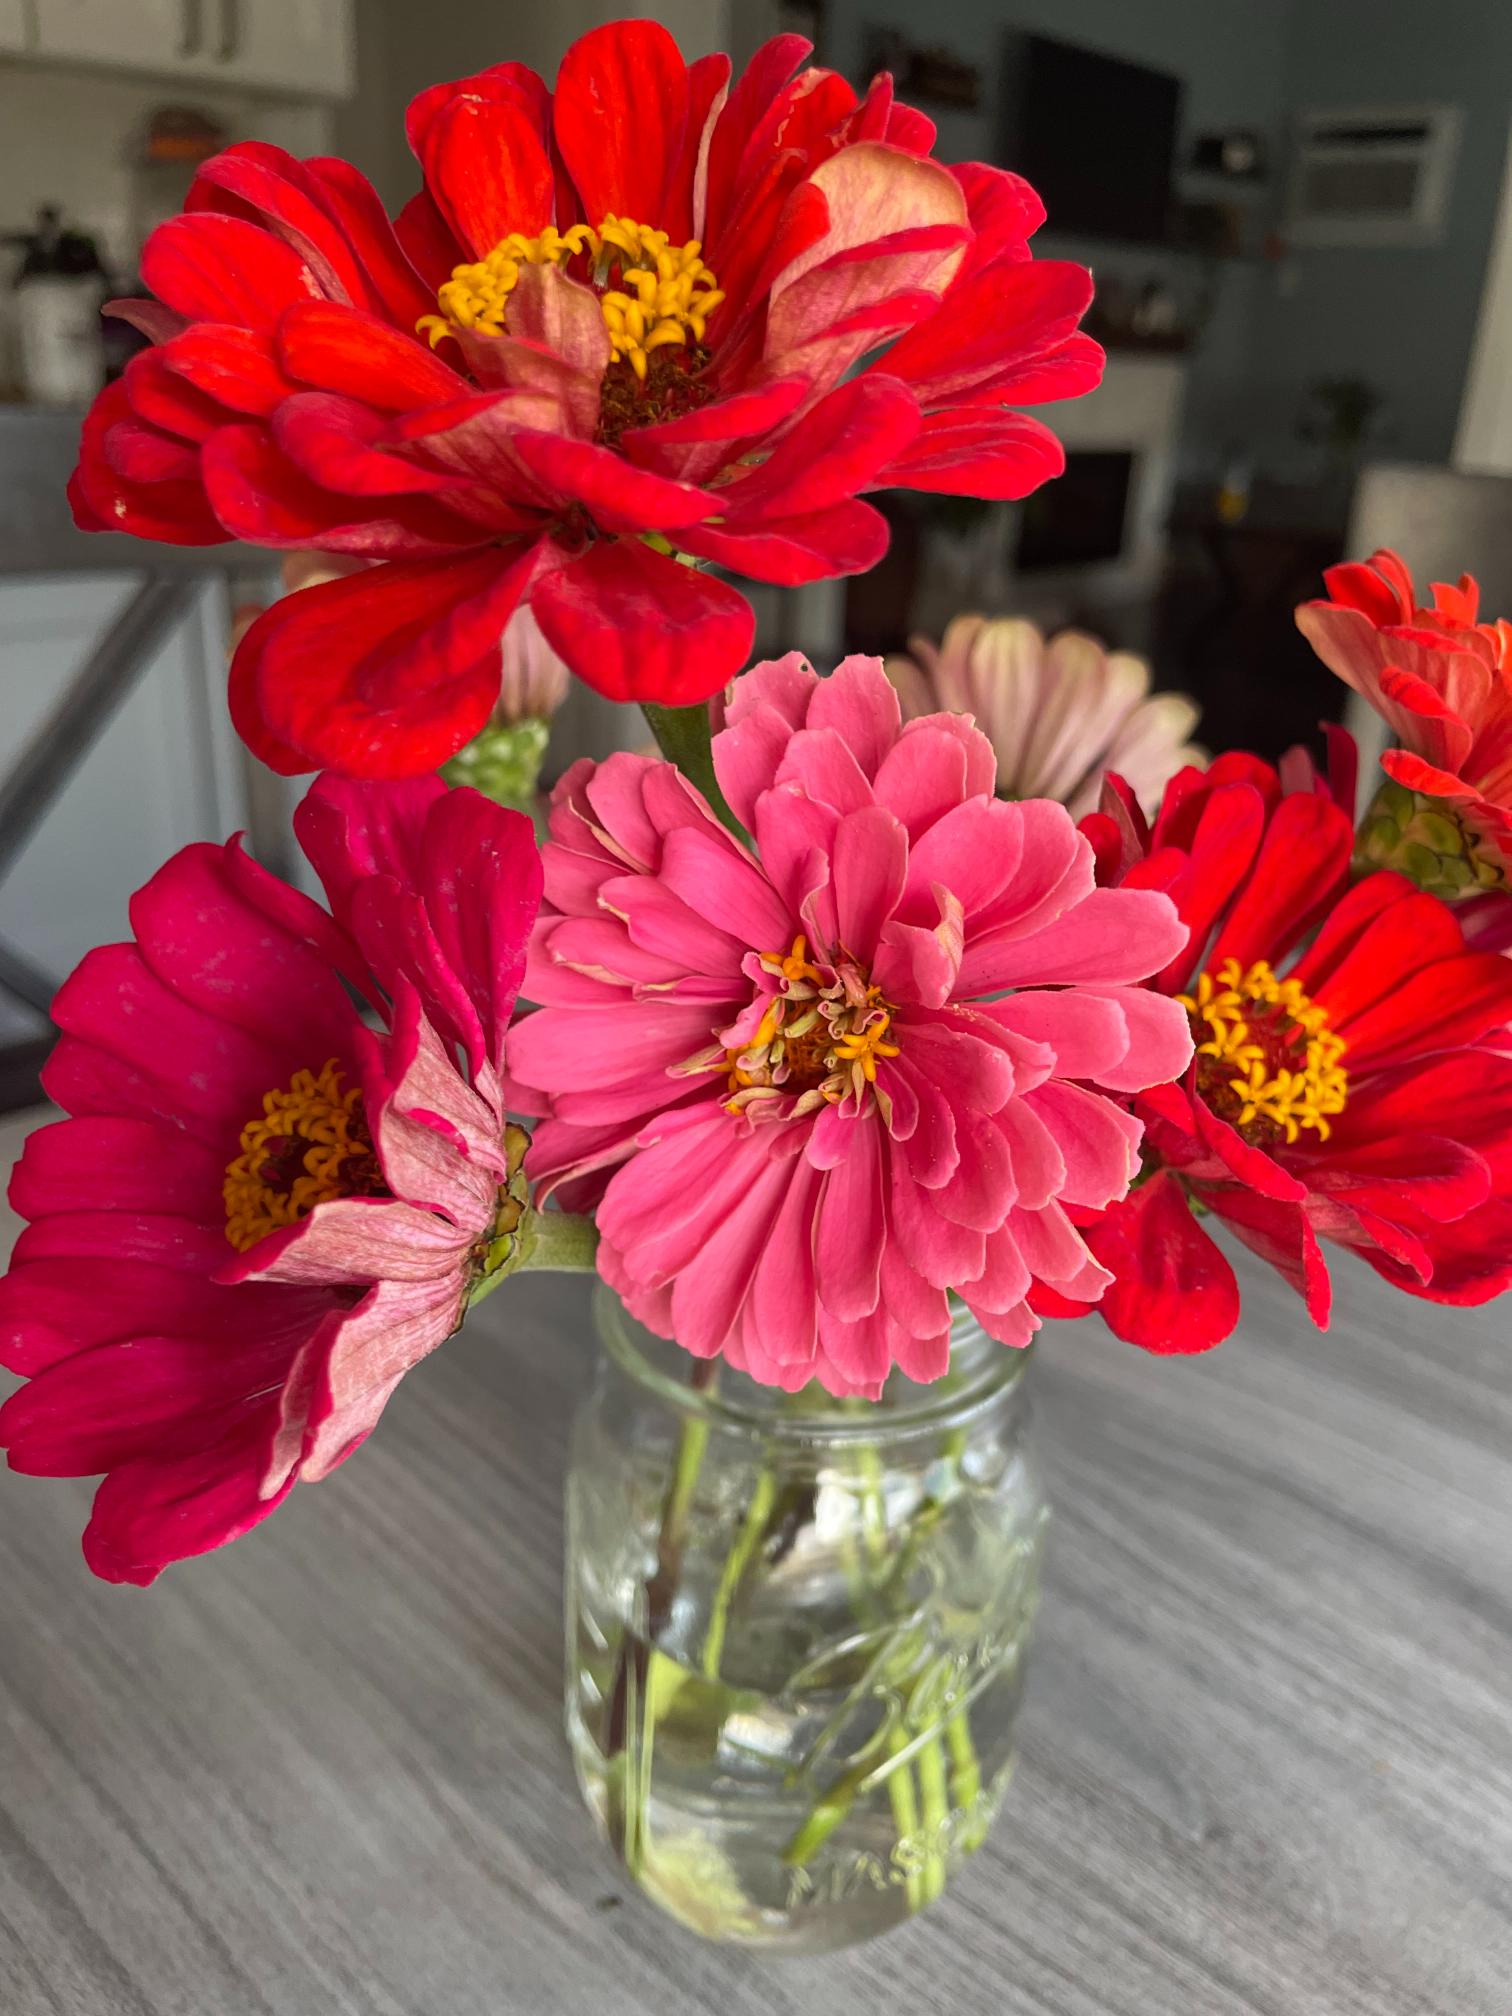 A bouquet of zinnias in a jar.best cut flowers to grow from seed